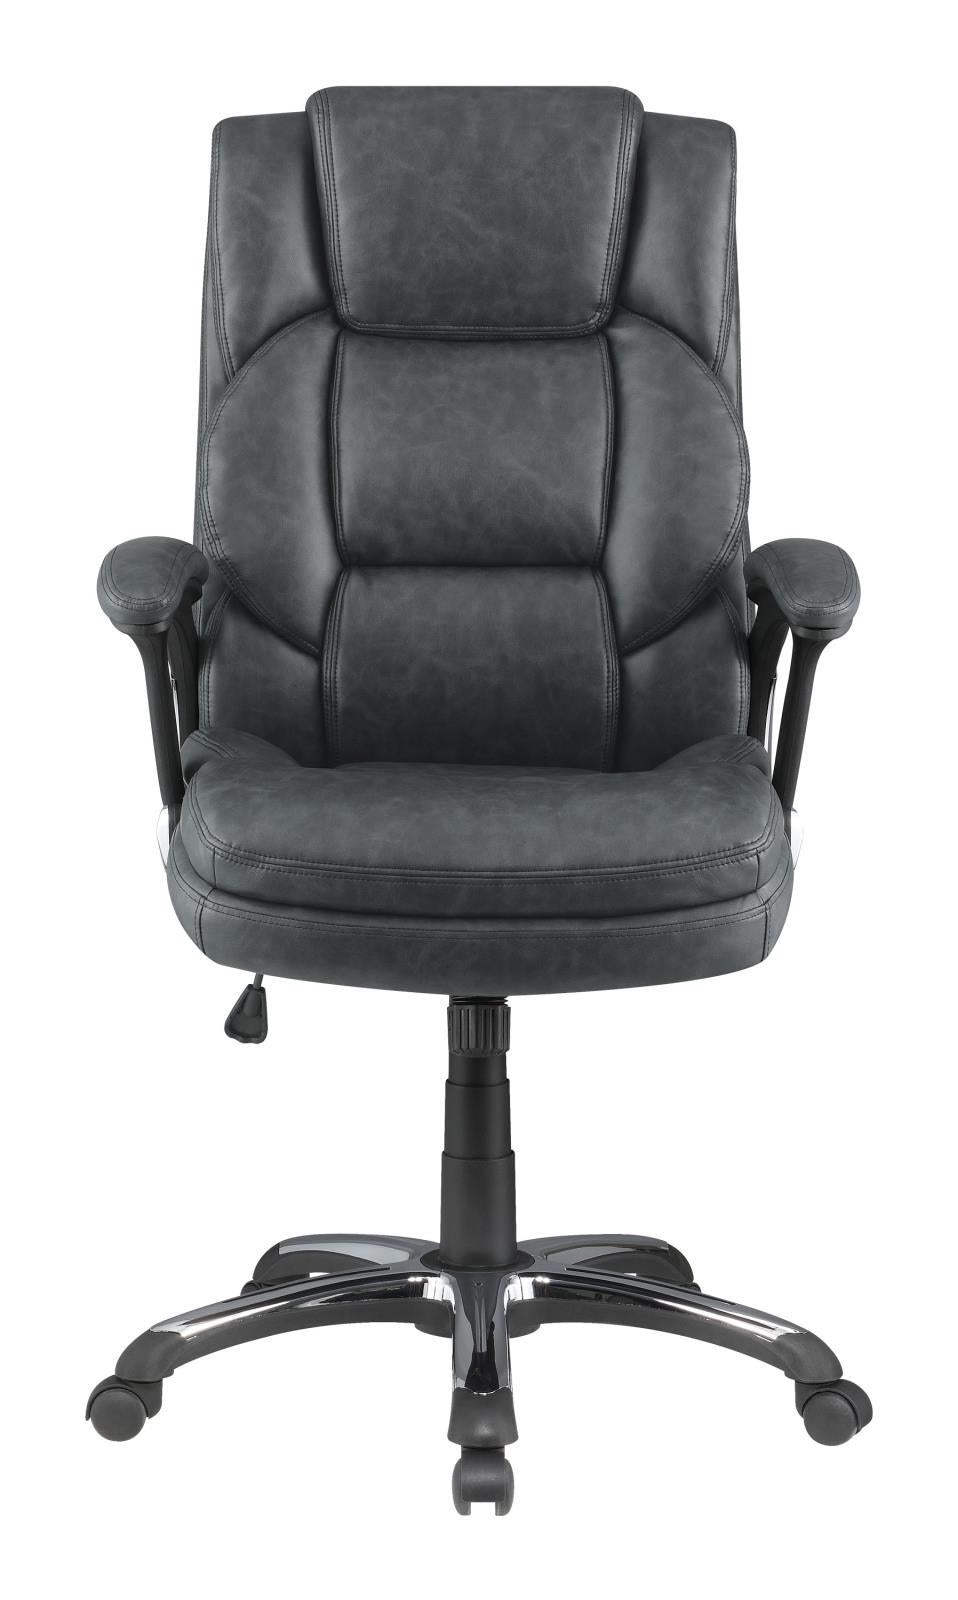 Nerris Adjustable Height Office Chair with Padded Arm Grey and Black - Half Price Furniture